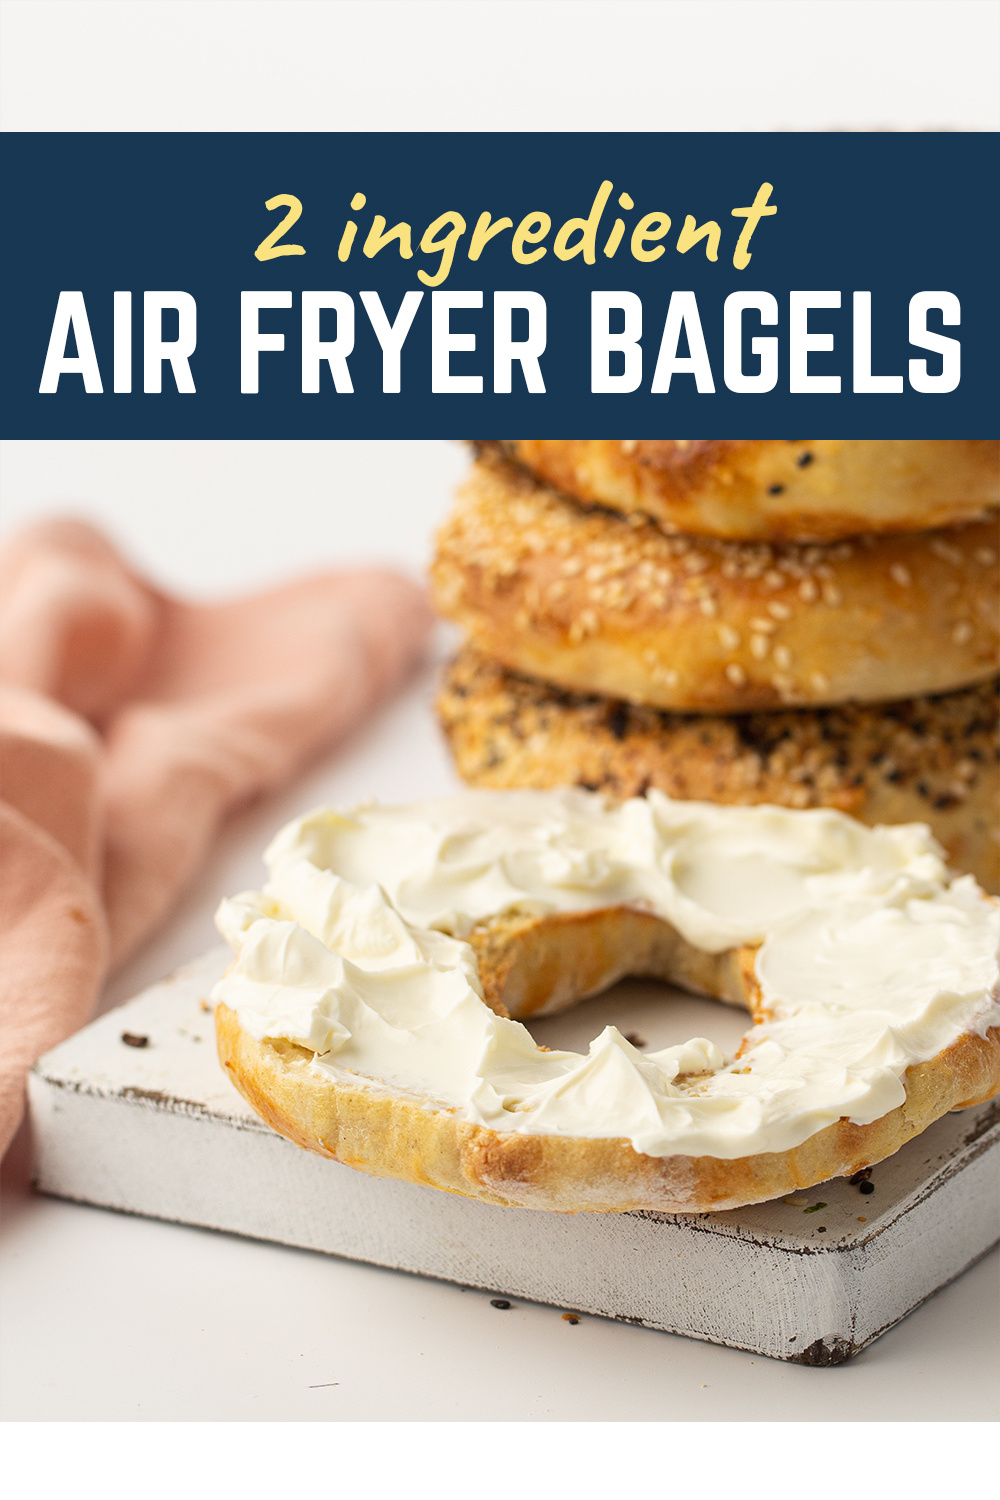 These homemade bagels are very easy to make, and totally customizable.